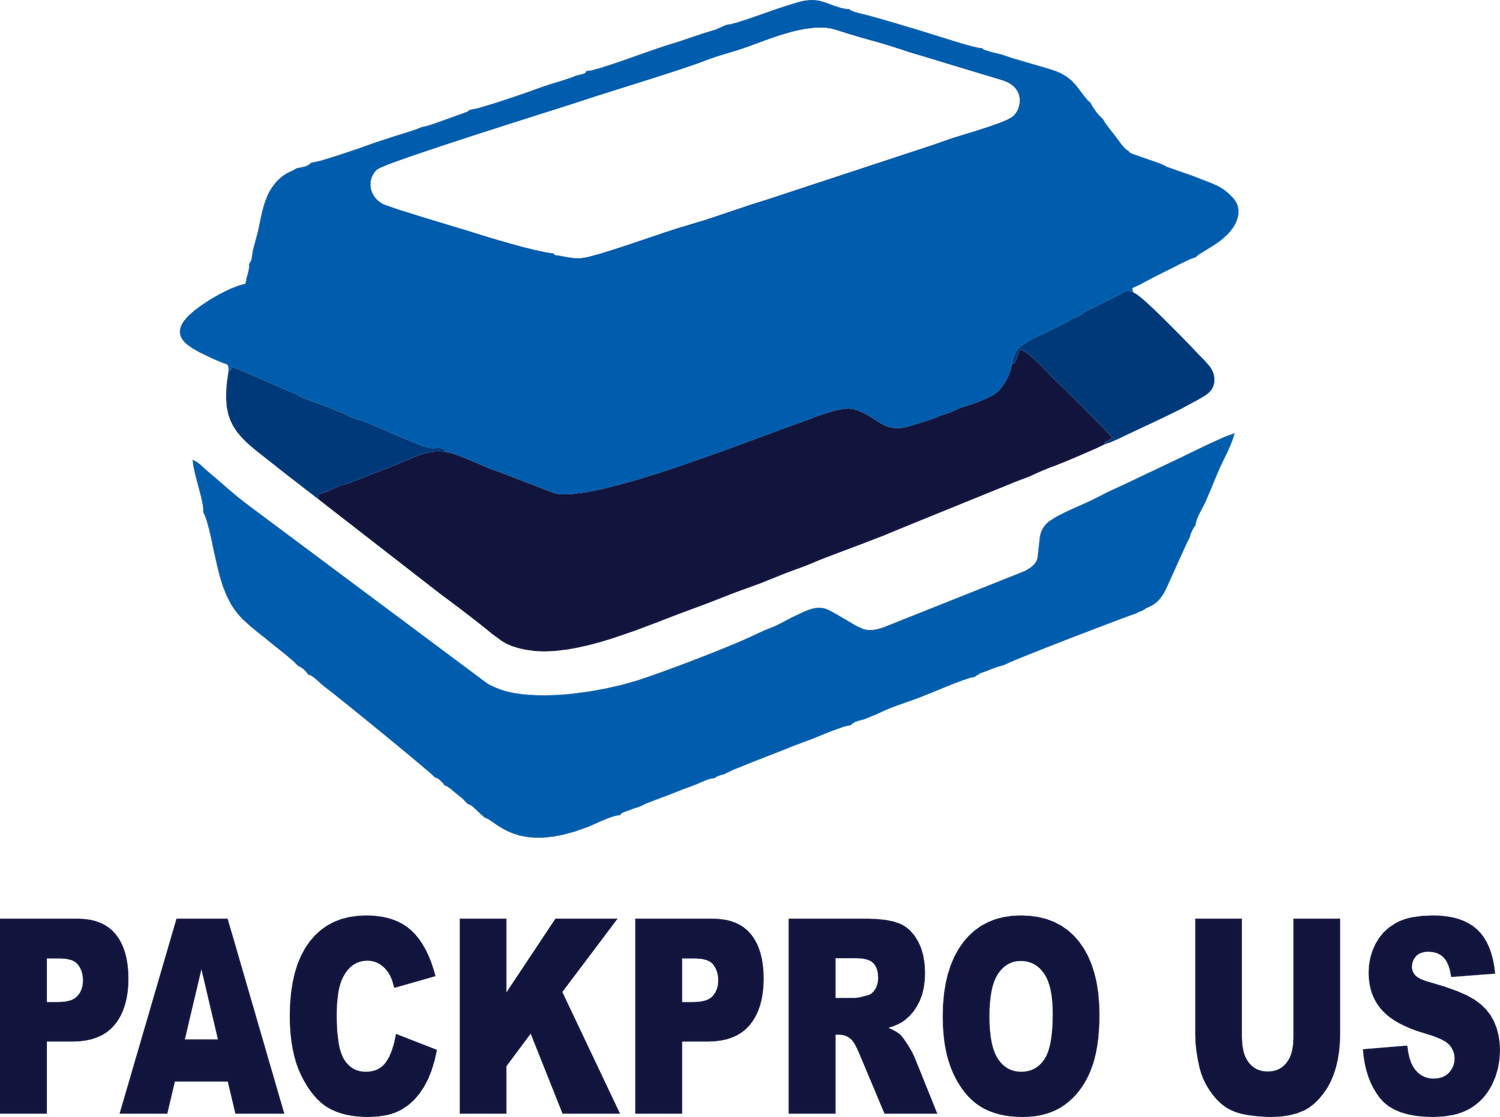 PackPro US